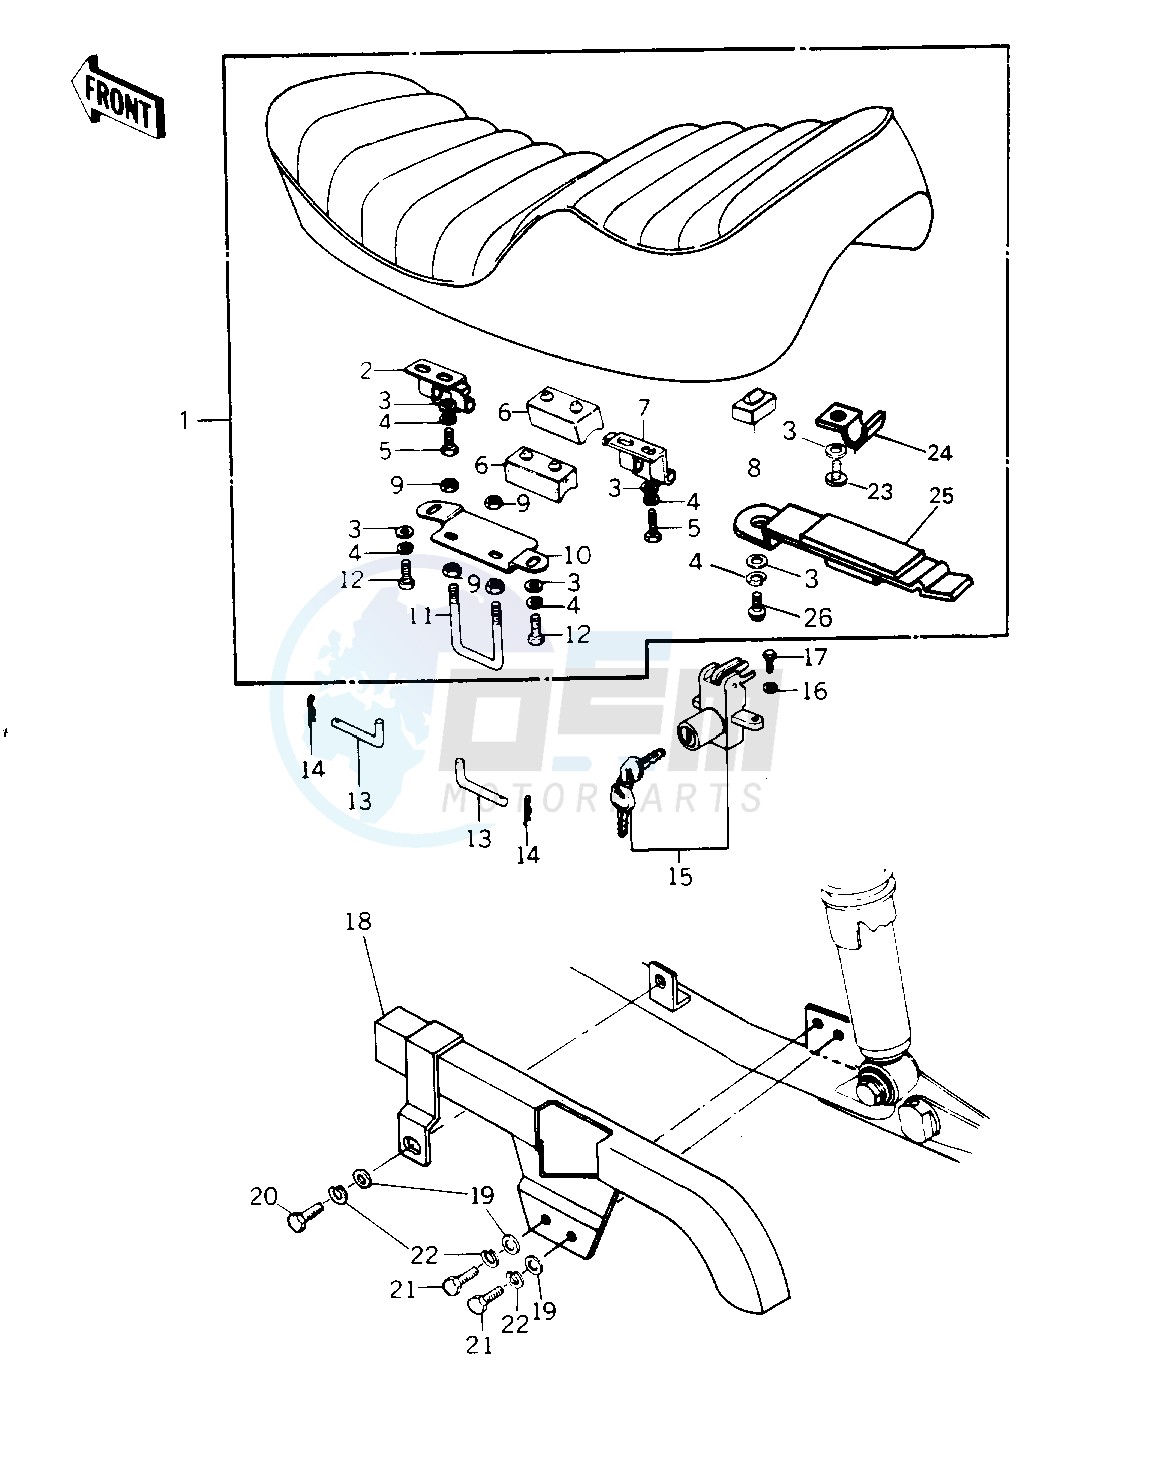 SEAT_CHAIN COVER blueprint